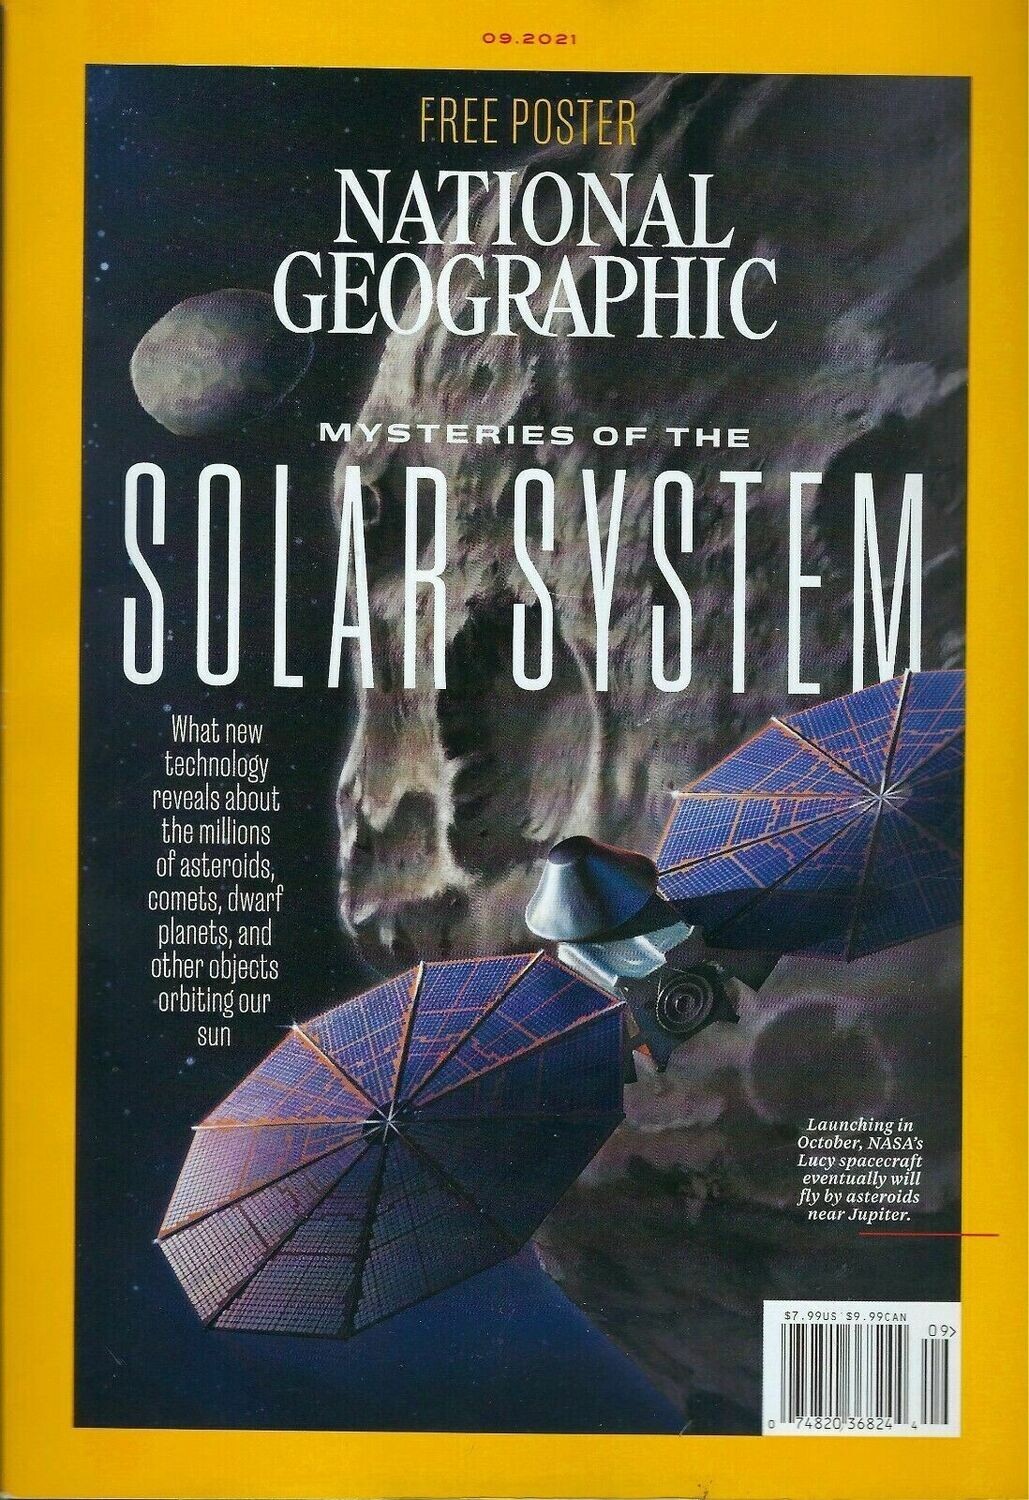 National Geographic #9 - The Mysteries of the Solar System